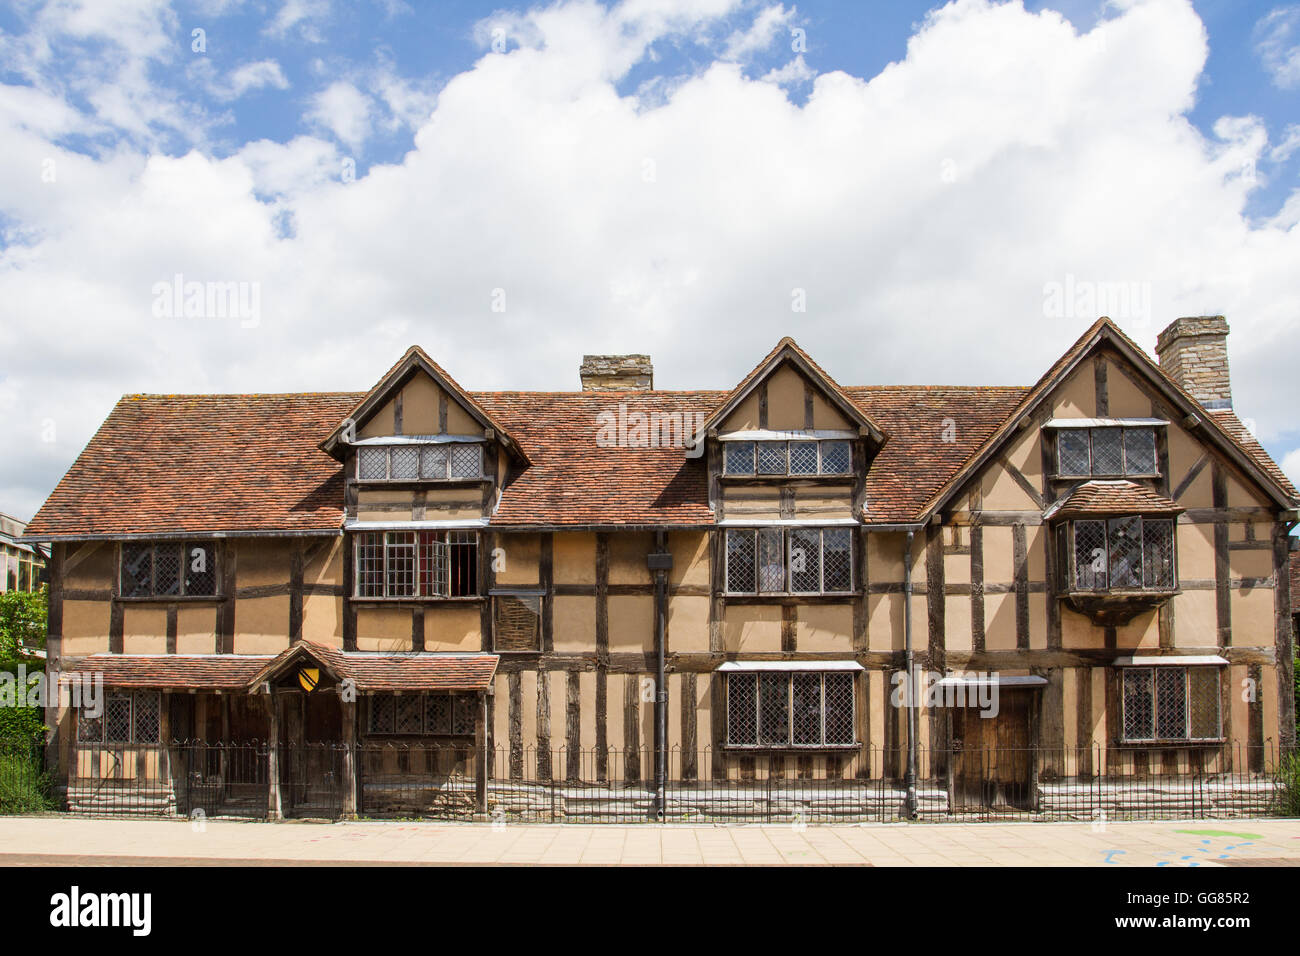 The house on Henley Street in Stratford Upon Avon, UK which was the birthplace of William Shakespeare and is now a museum. Stock Photo